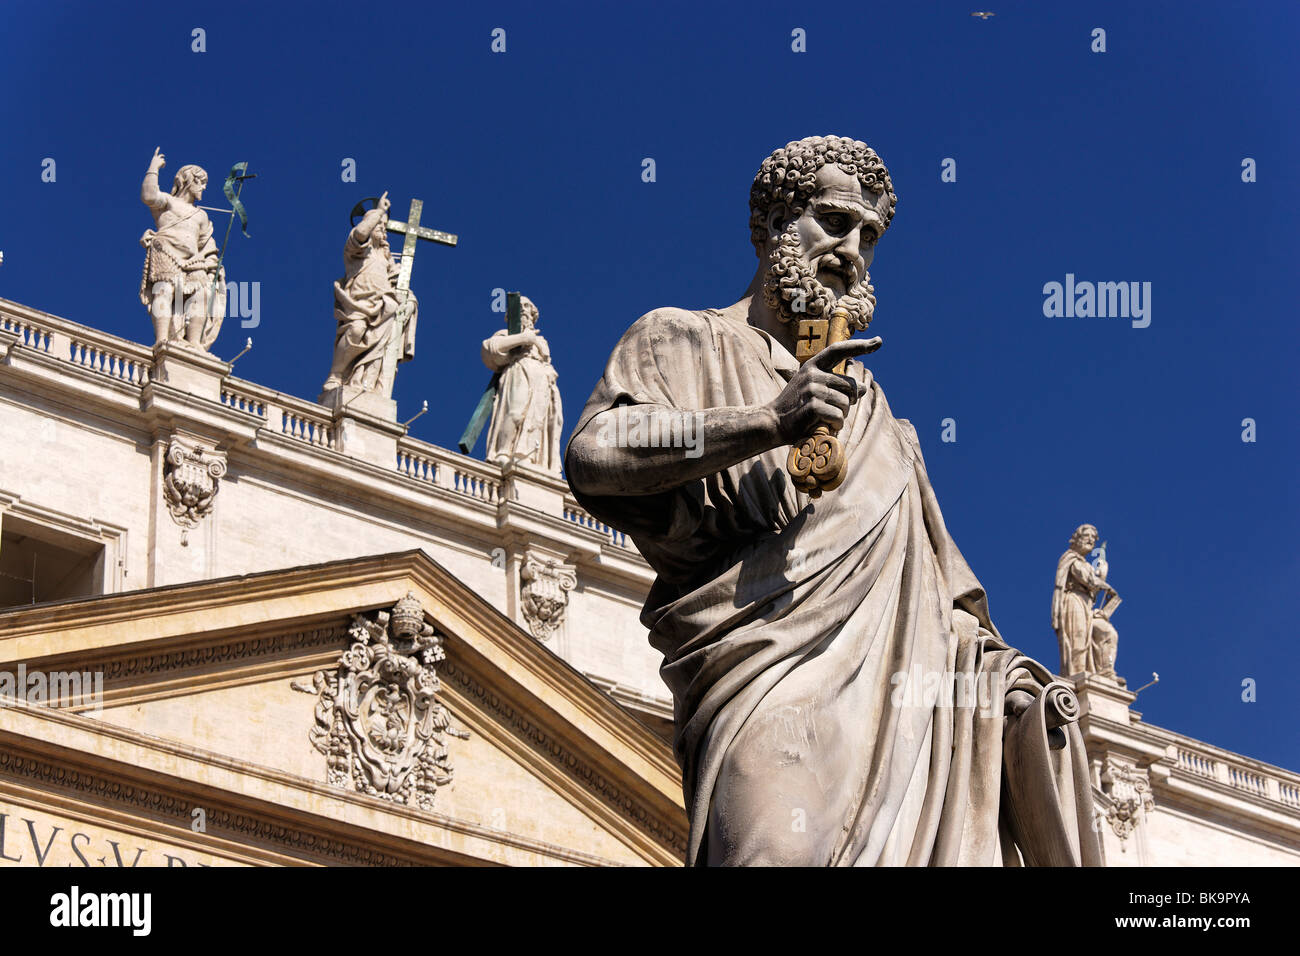 Fascade of St. Peter's Basilica, Statue of Saint Peter in foreground, Vatican City, Rome, Italy Stock Photo